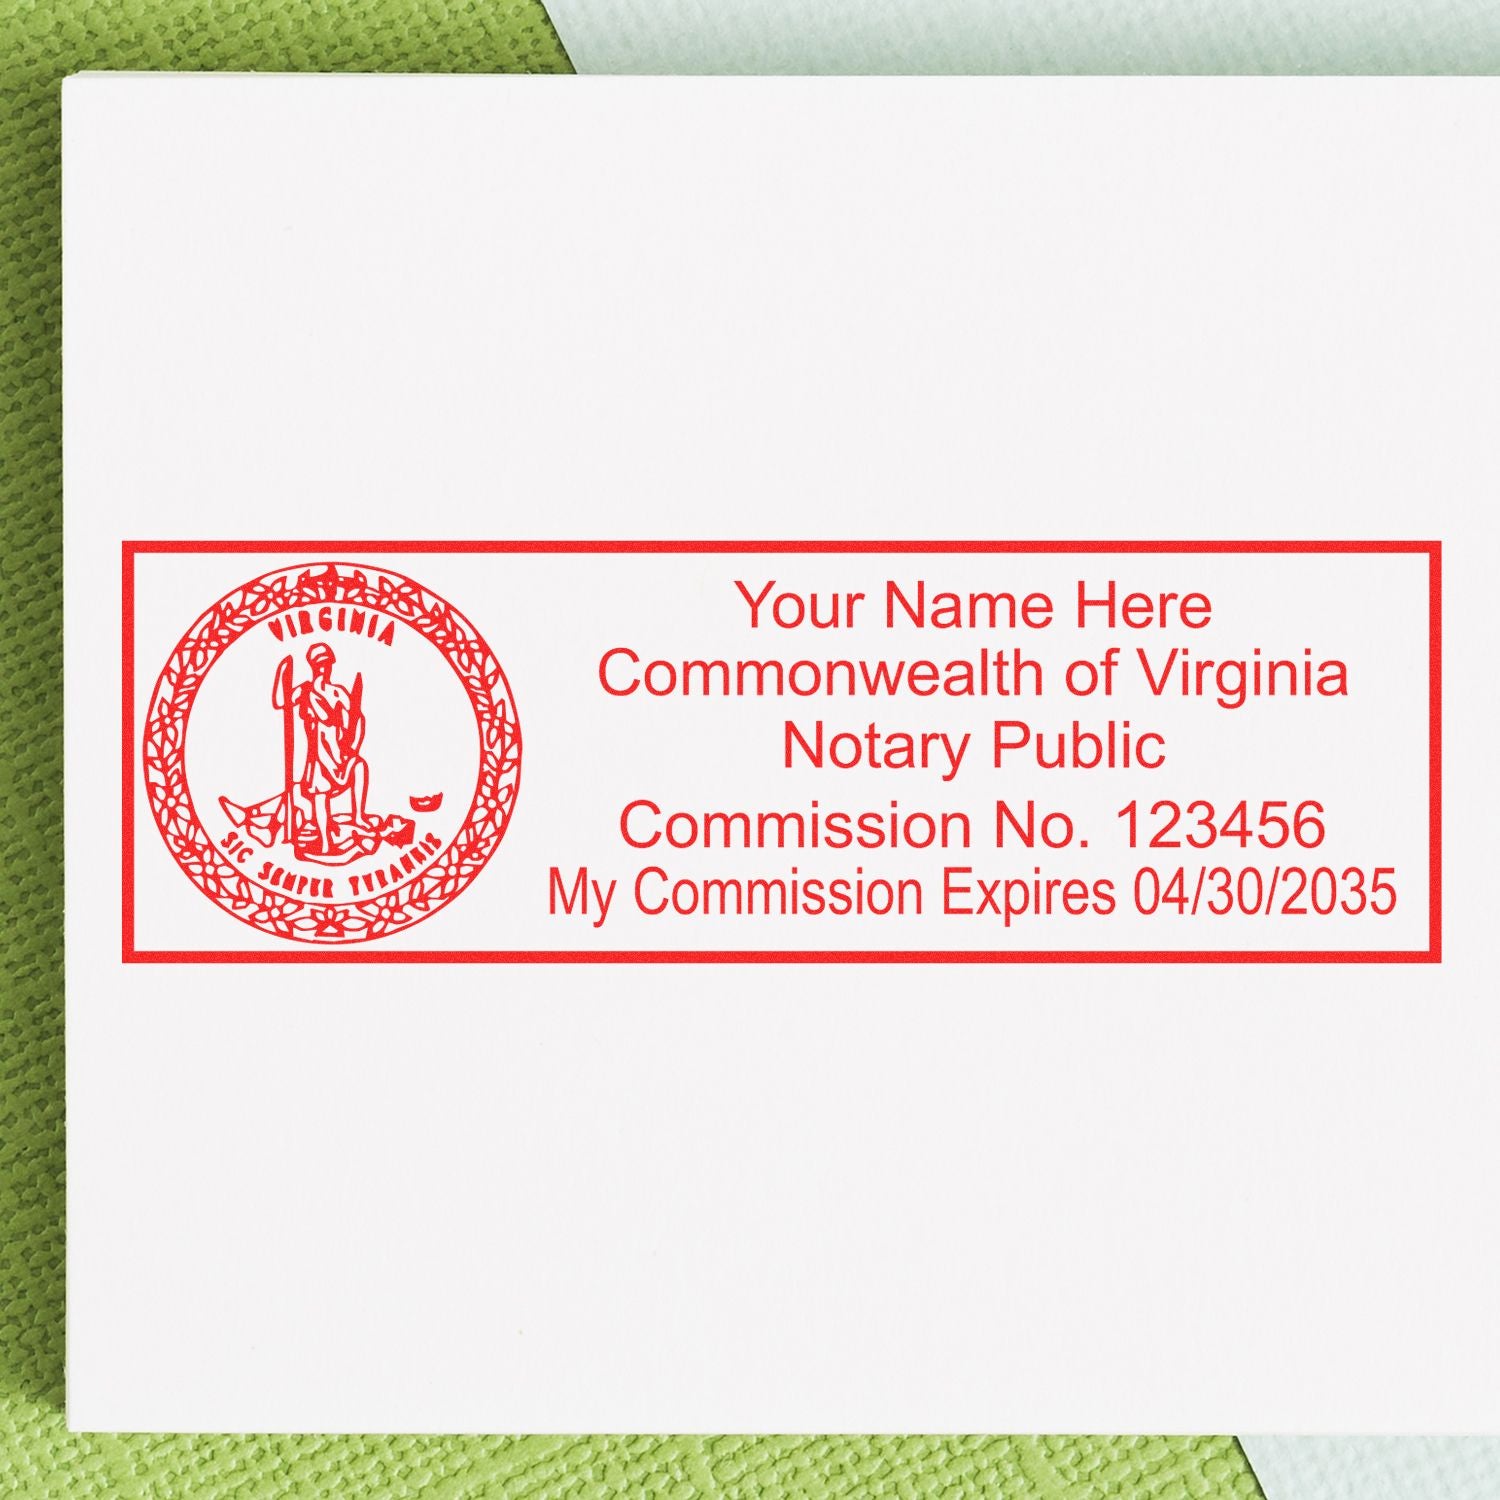 The main image for the PSI Virginia Notary Stamp depicting a sample of the imprint and electronic files